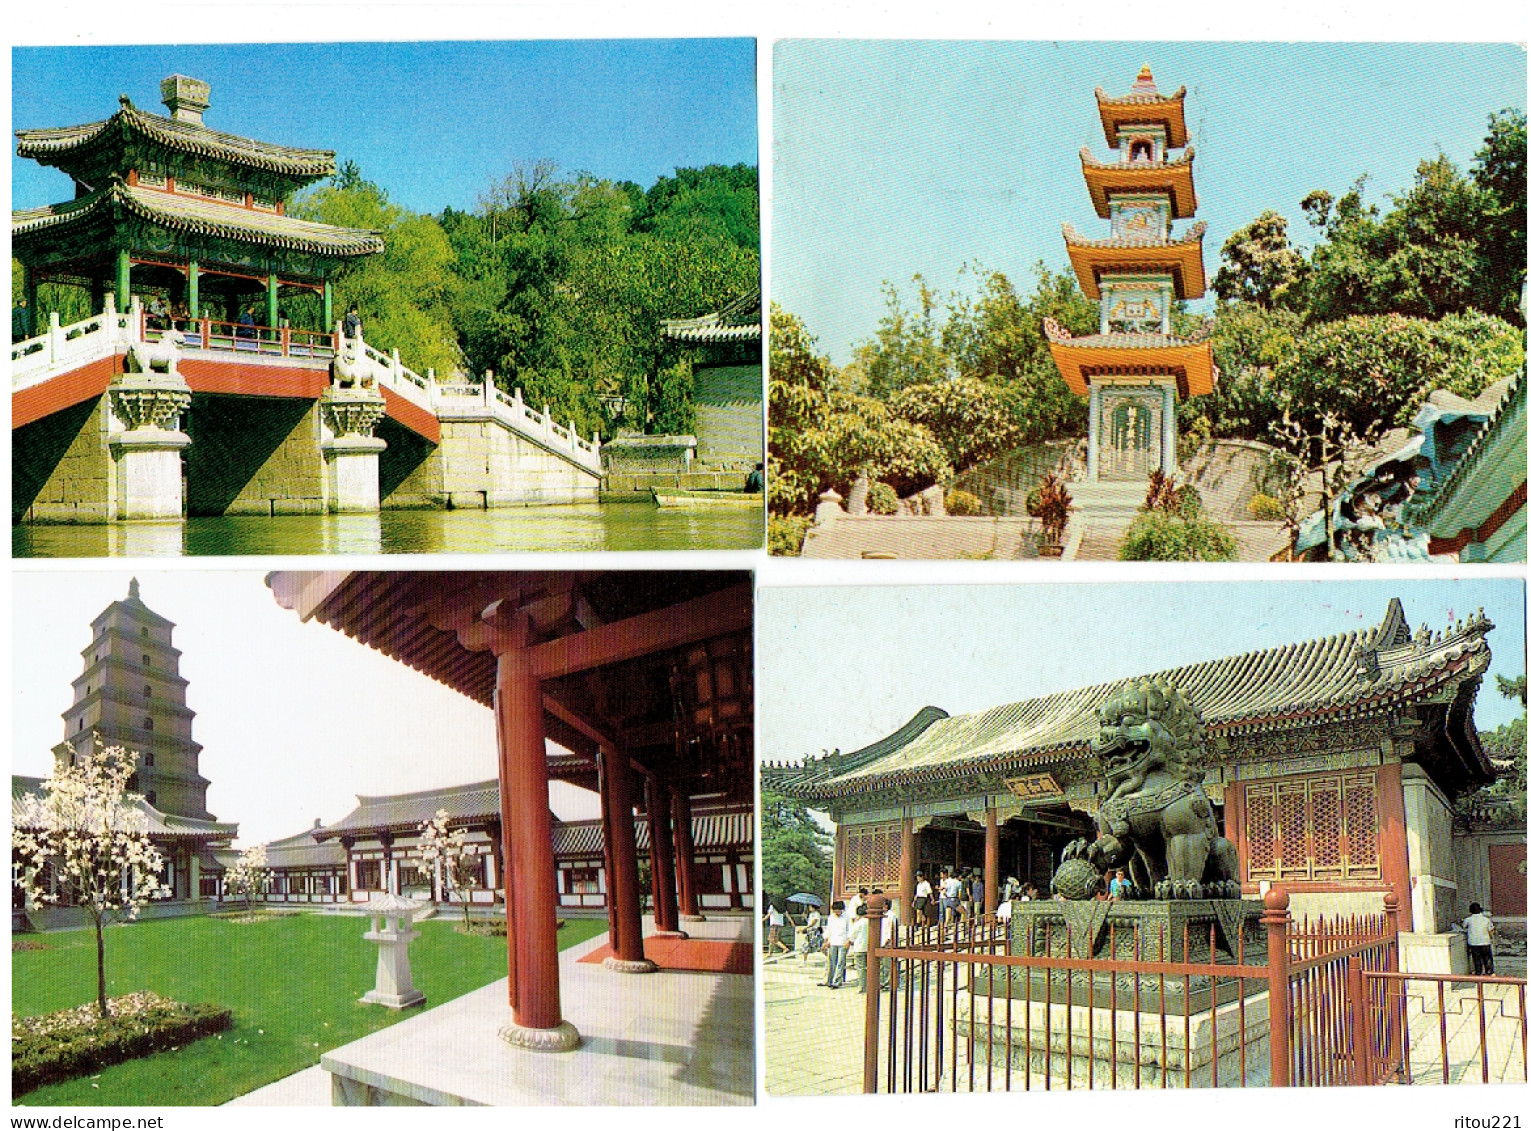 Lot 16 Cpm - CHINE - Monument PAN GATE PUTUO TEMPLE Lac QIAN TOMB SACRED TOWER YOMBU PALACE Grande Muraille - Chine